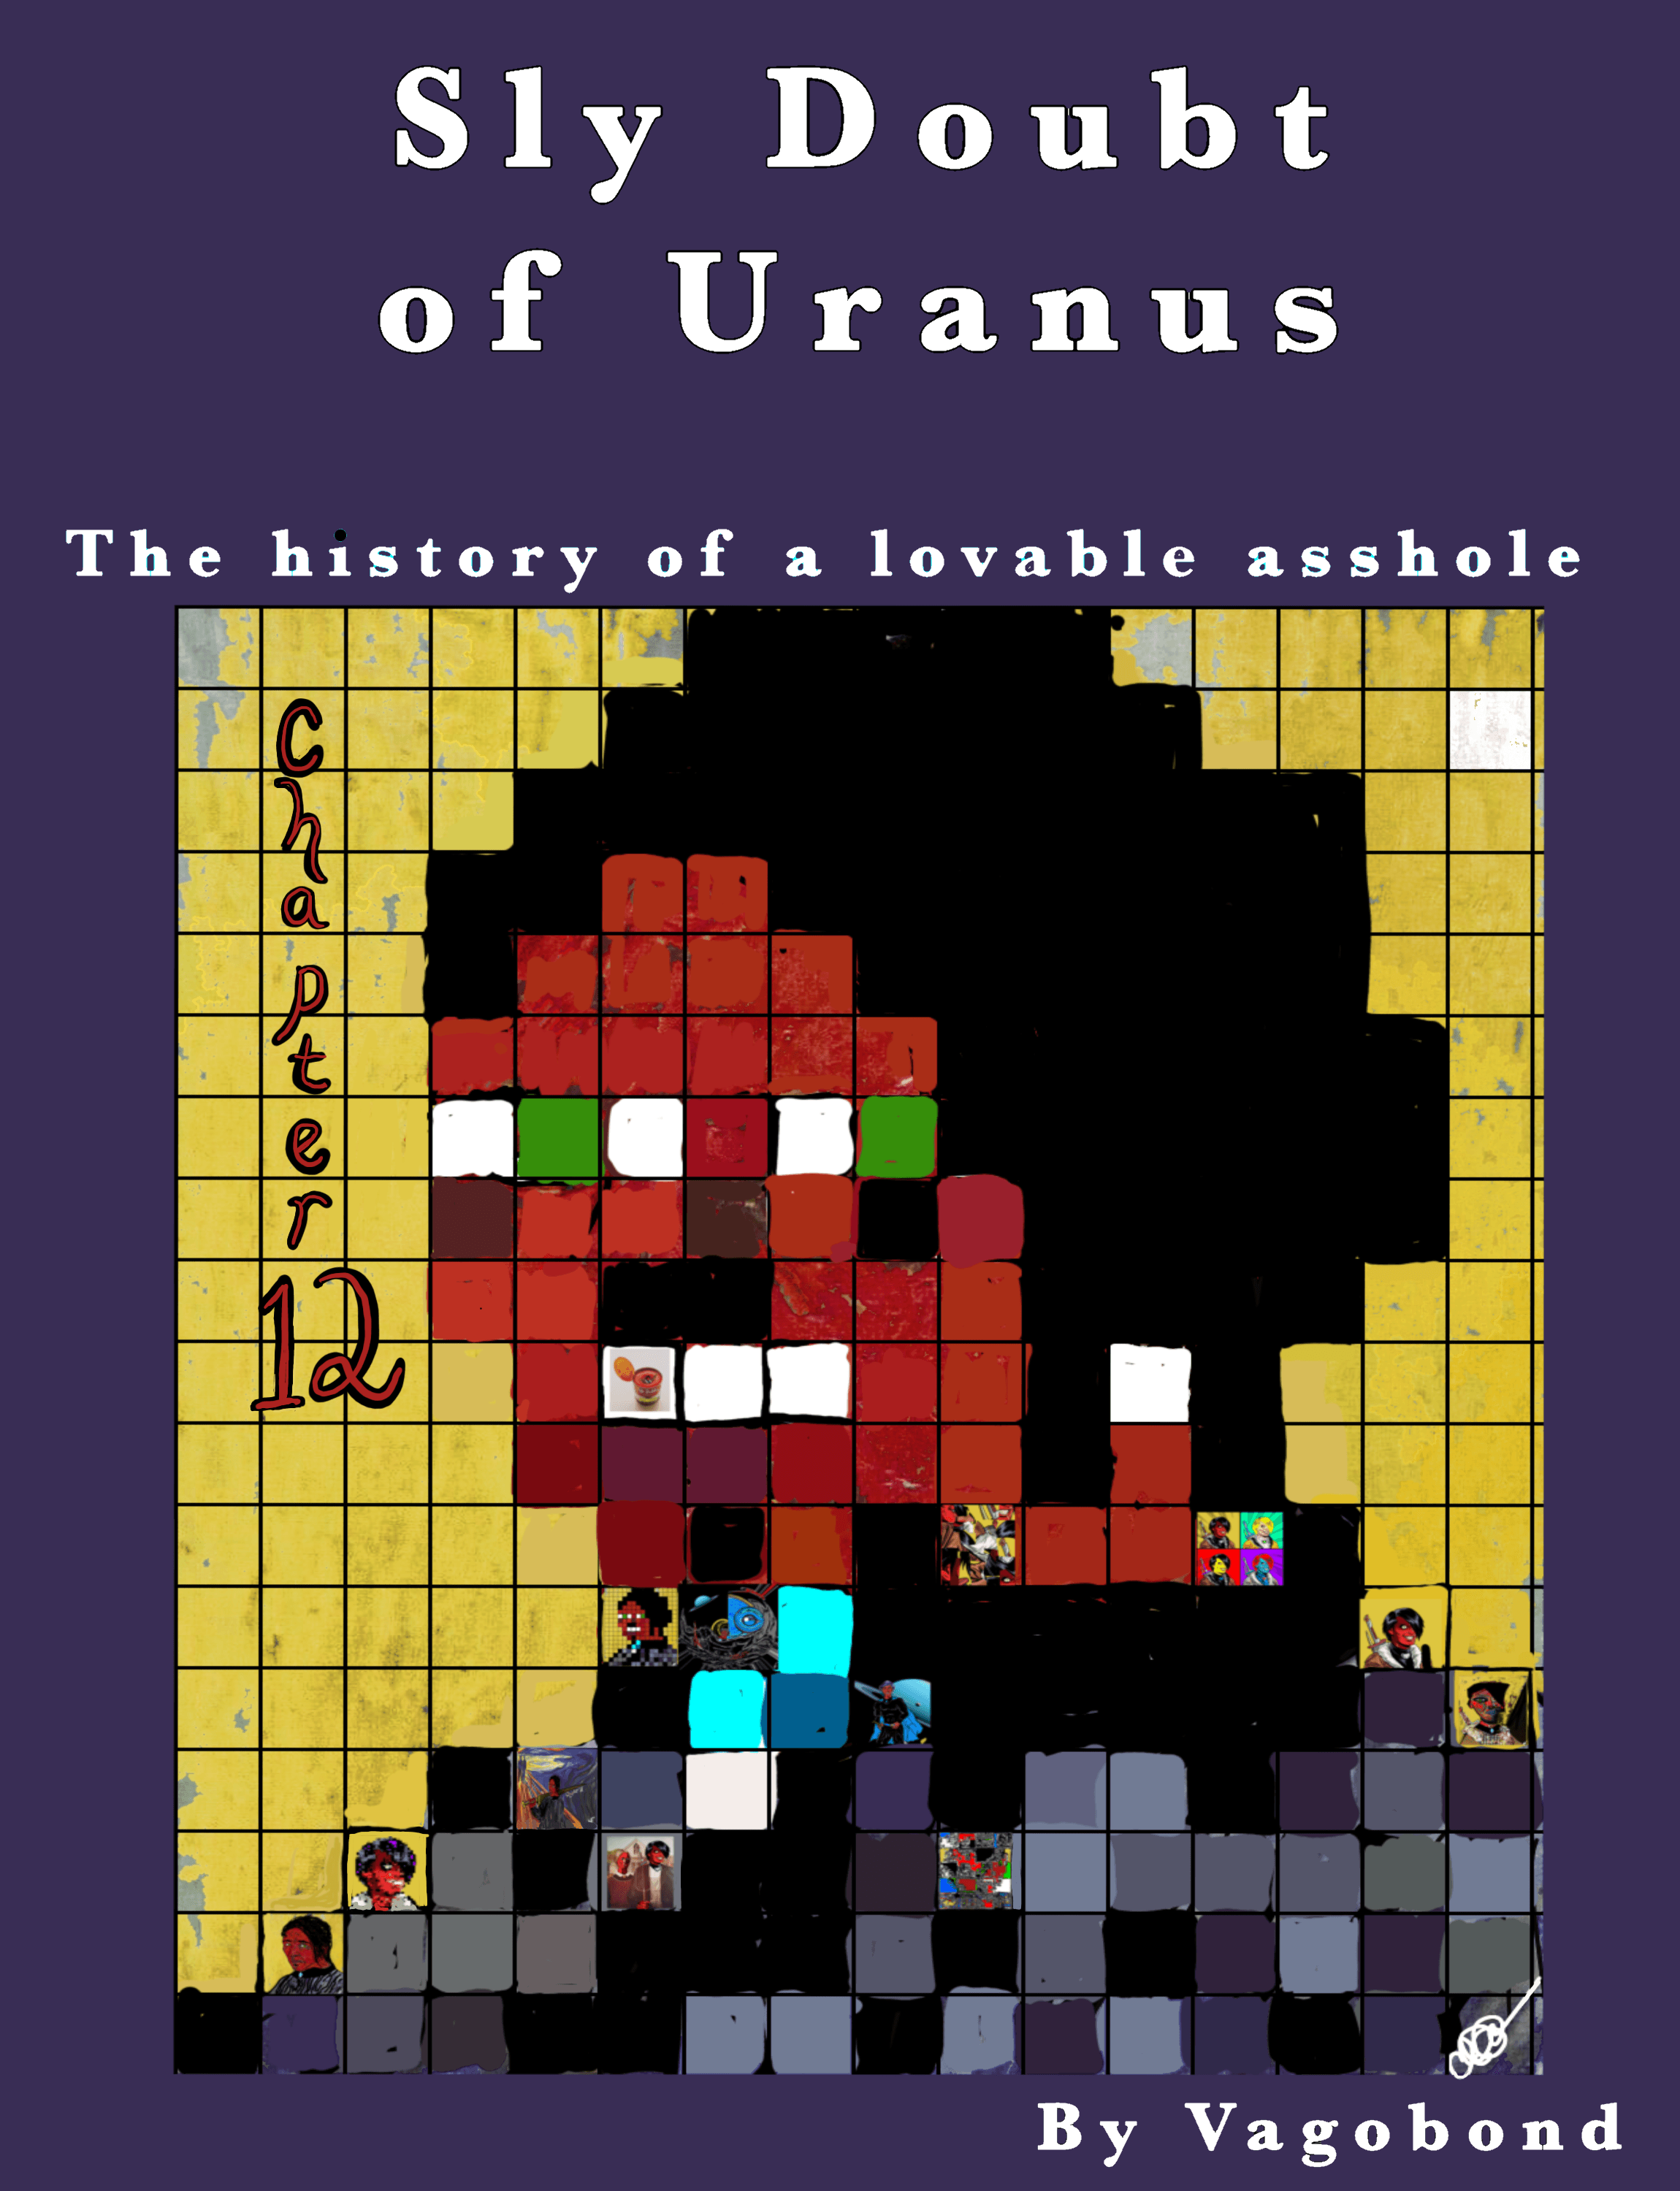 Sly Doubt of Uranus: The History of a Lovable Asshole - Chapter 12: 1st Edition